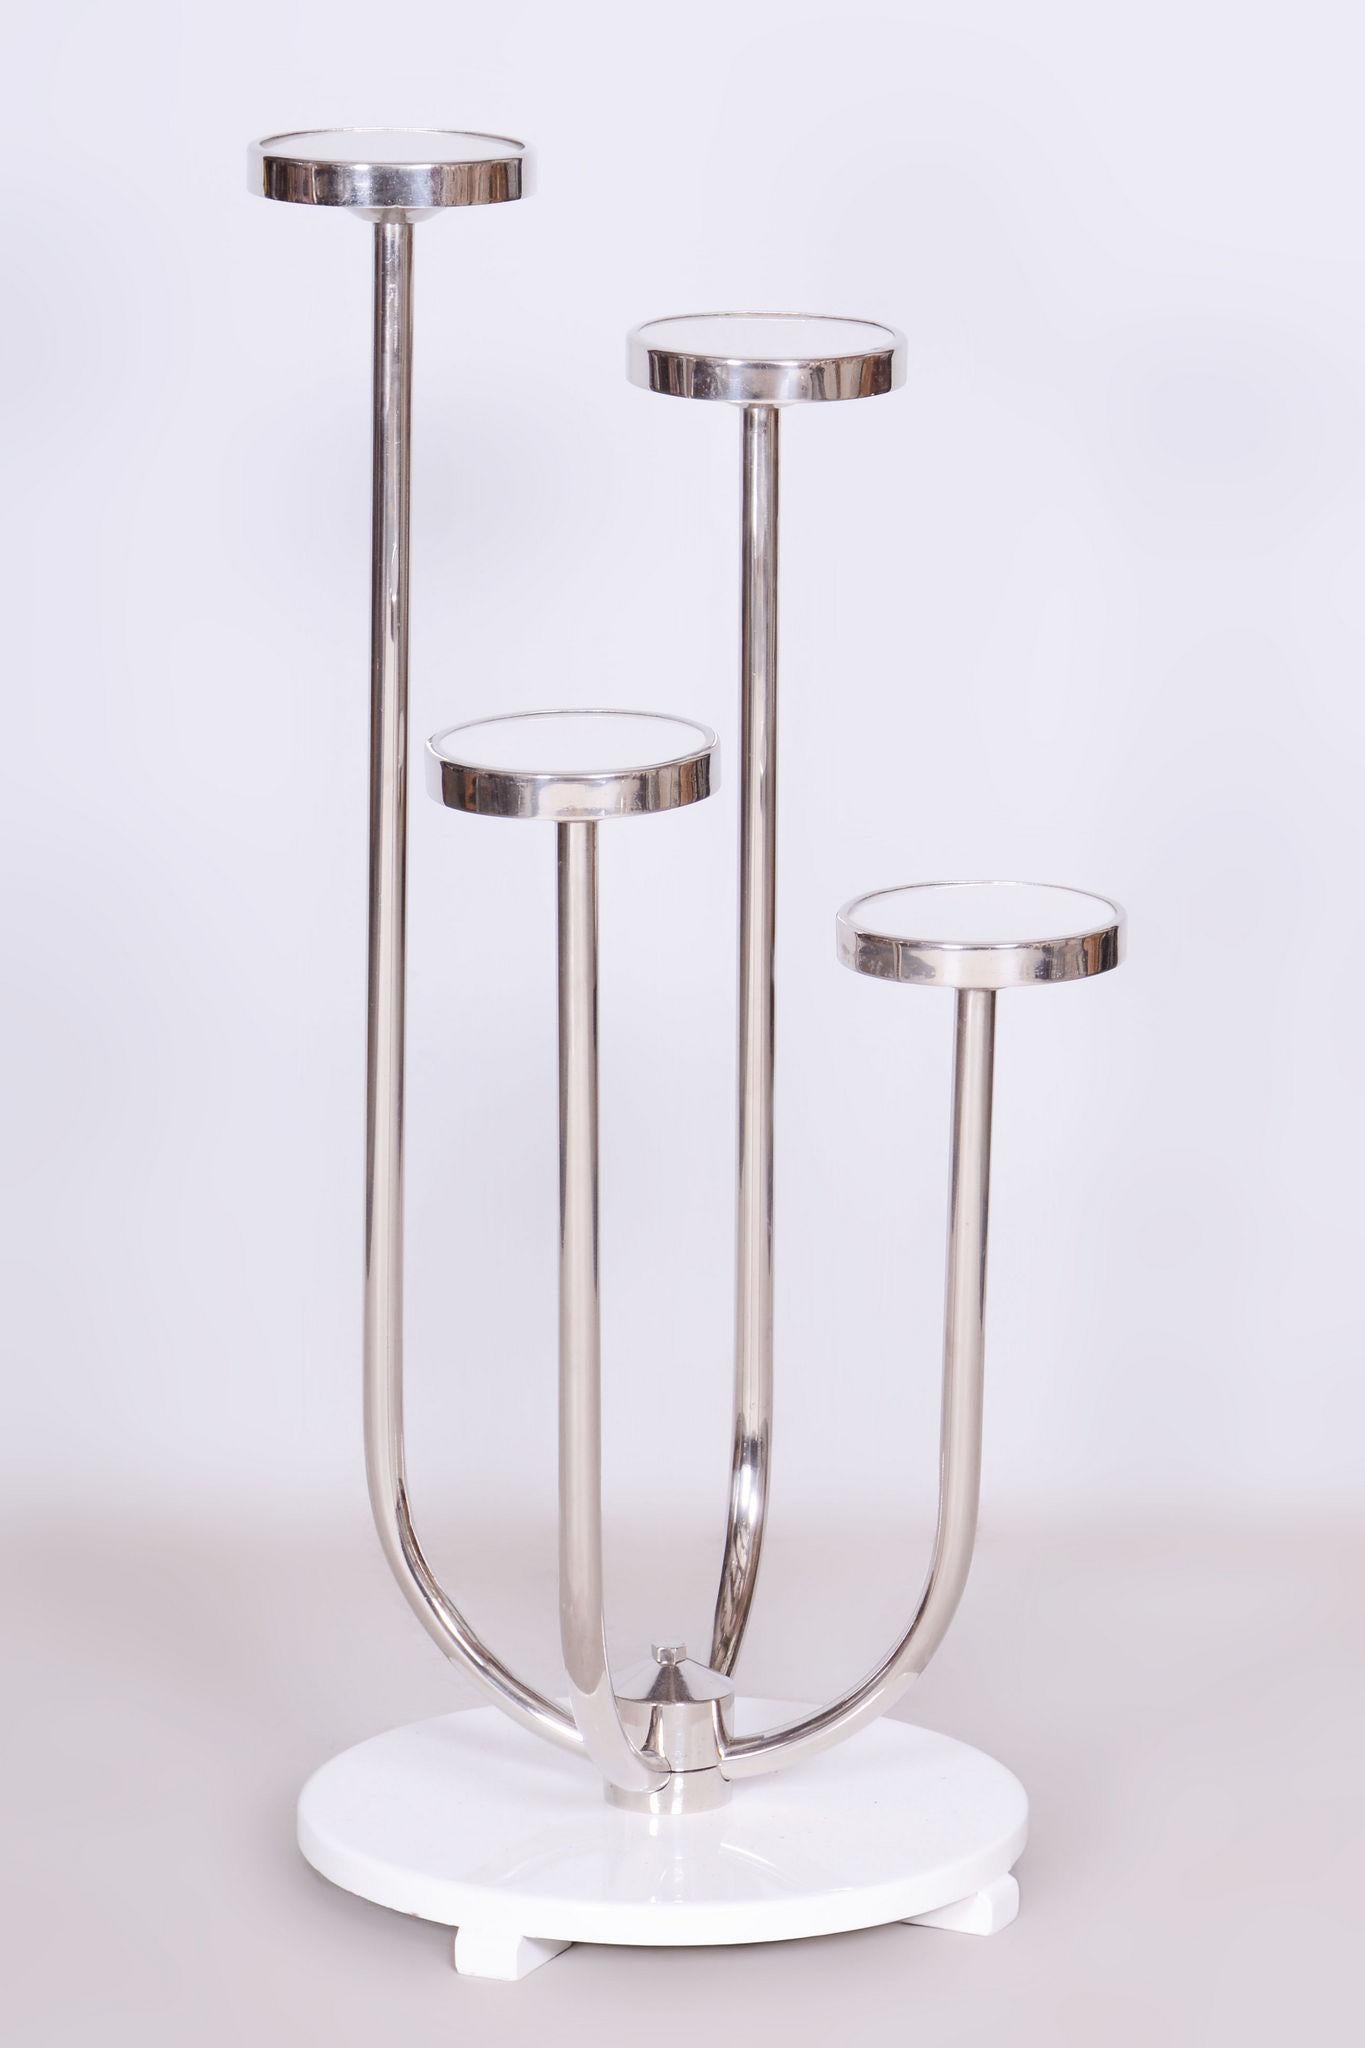 Restored Bauhaus Flower Stand, Vichr a spol, Chrome-plated Steel, Czechia, 1930s For Sale 5